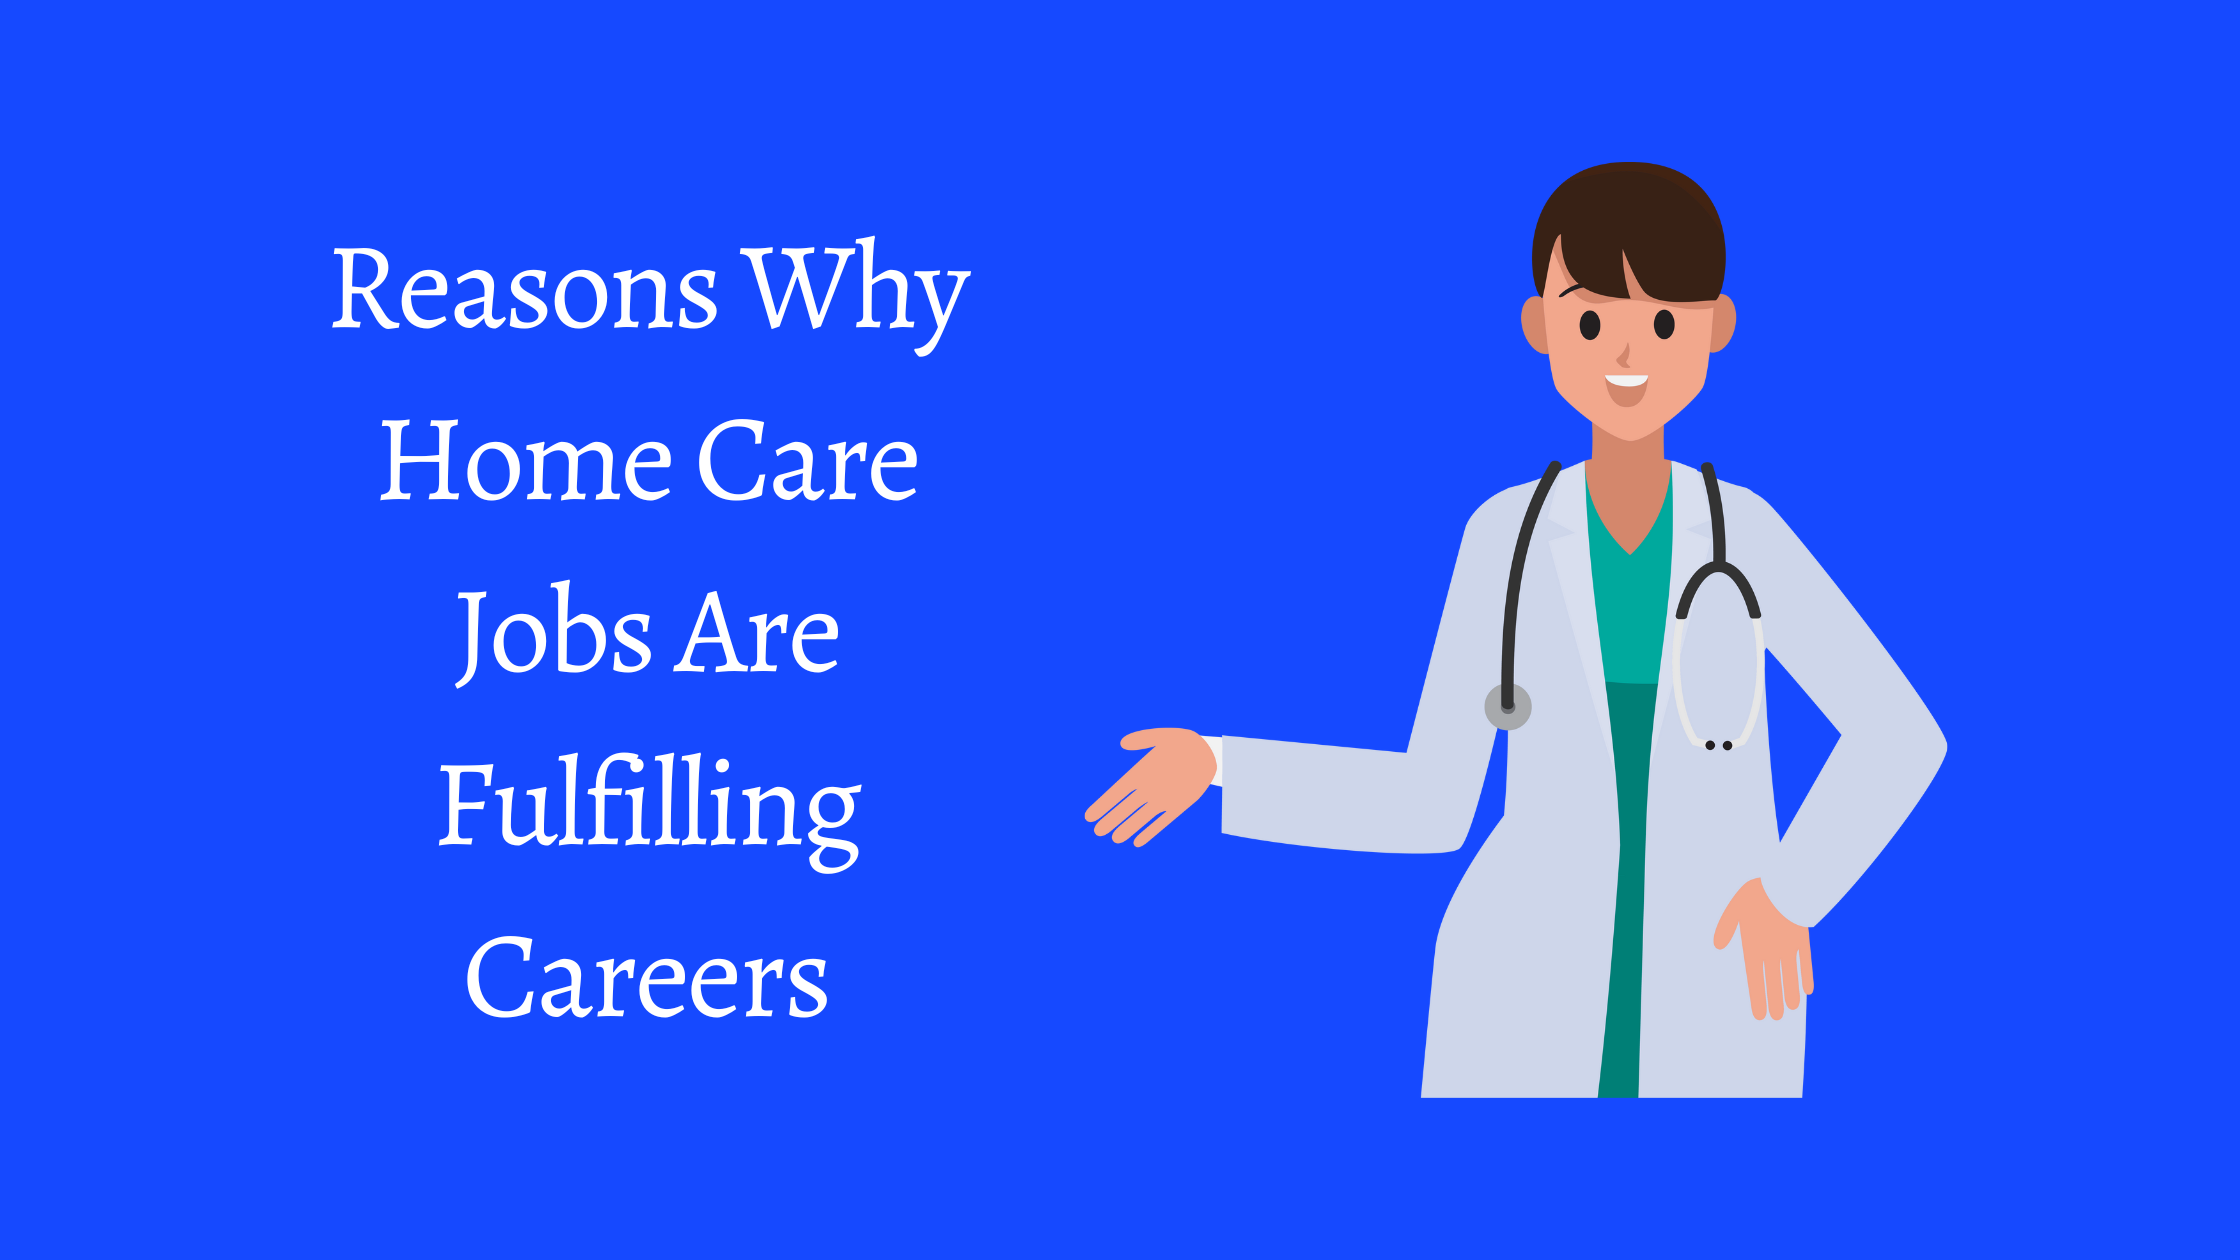 Reasons Why Home Care Jobs Are Fulfilling Careers